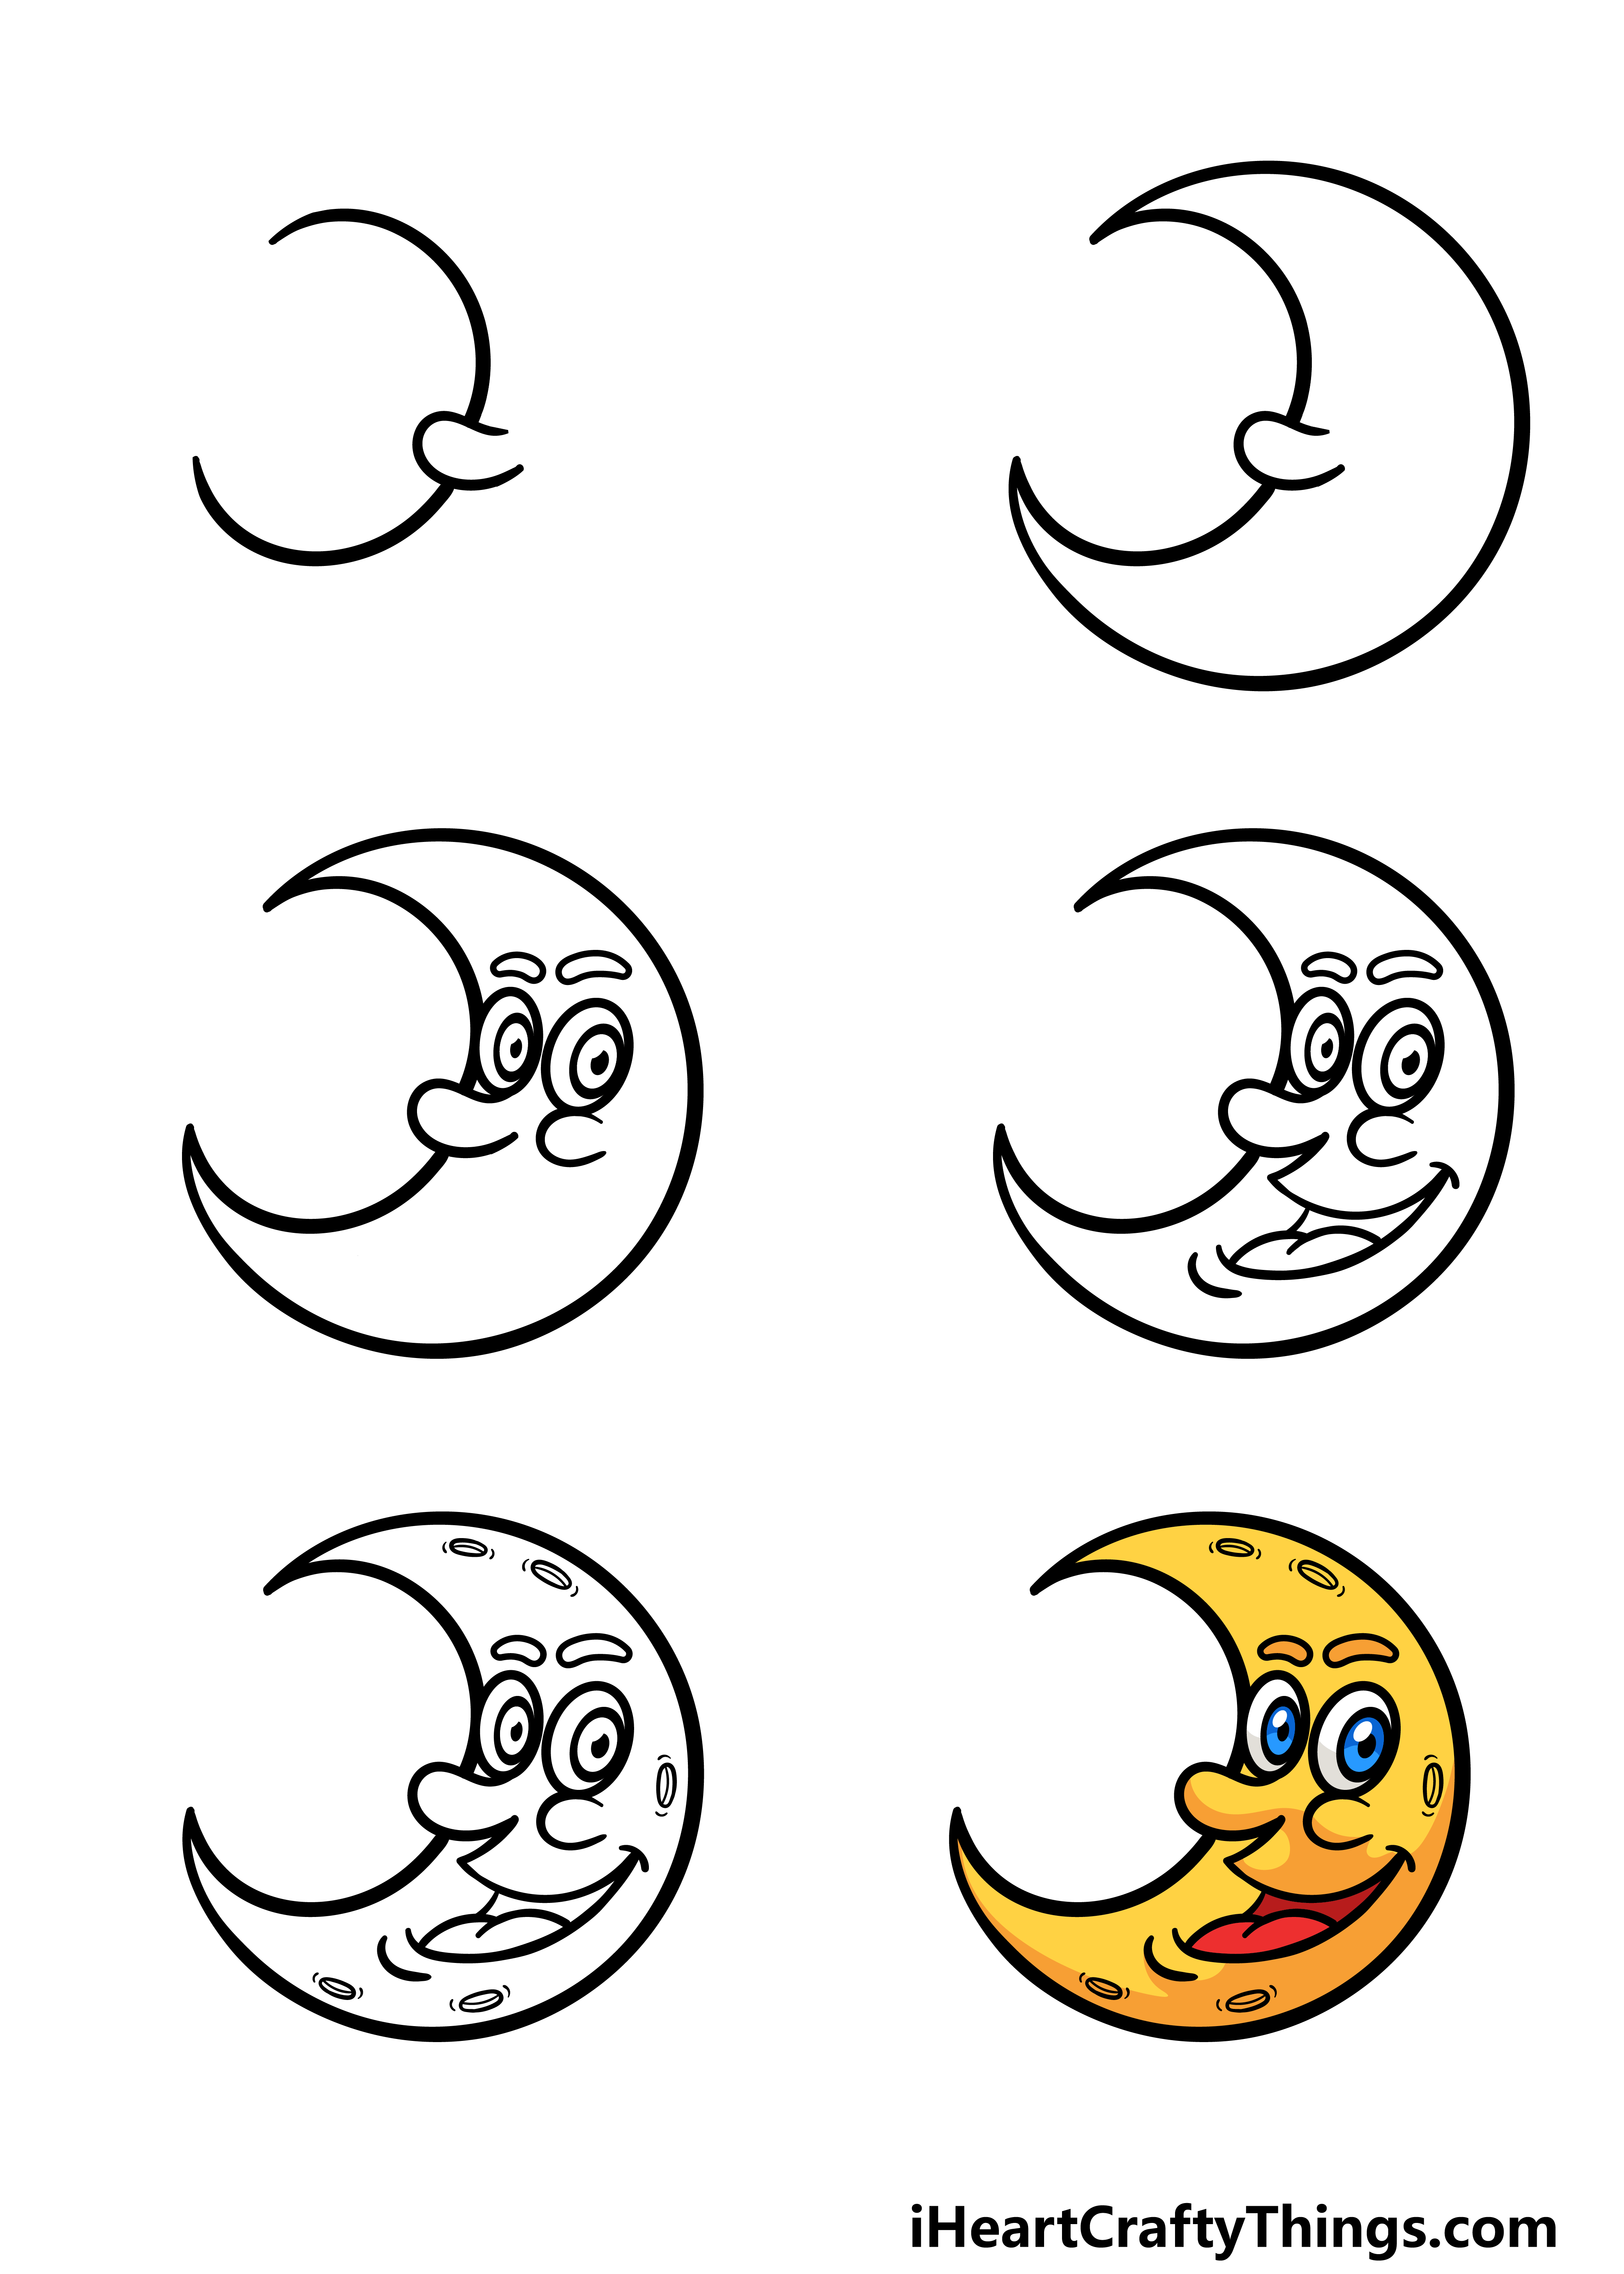 how to draw a cartoon moon in 6 steps